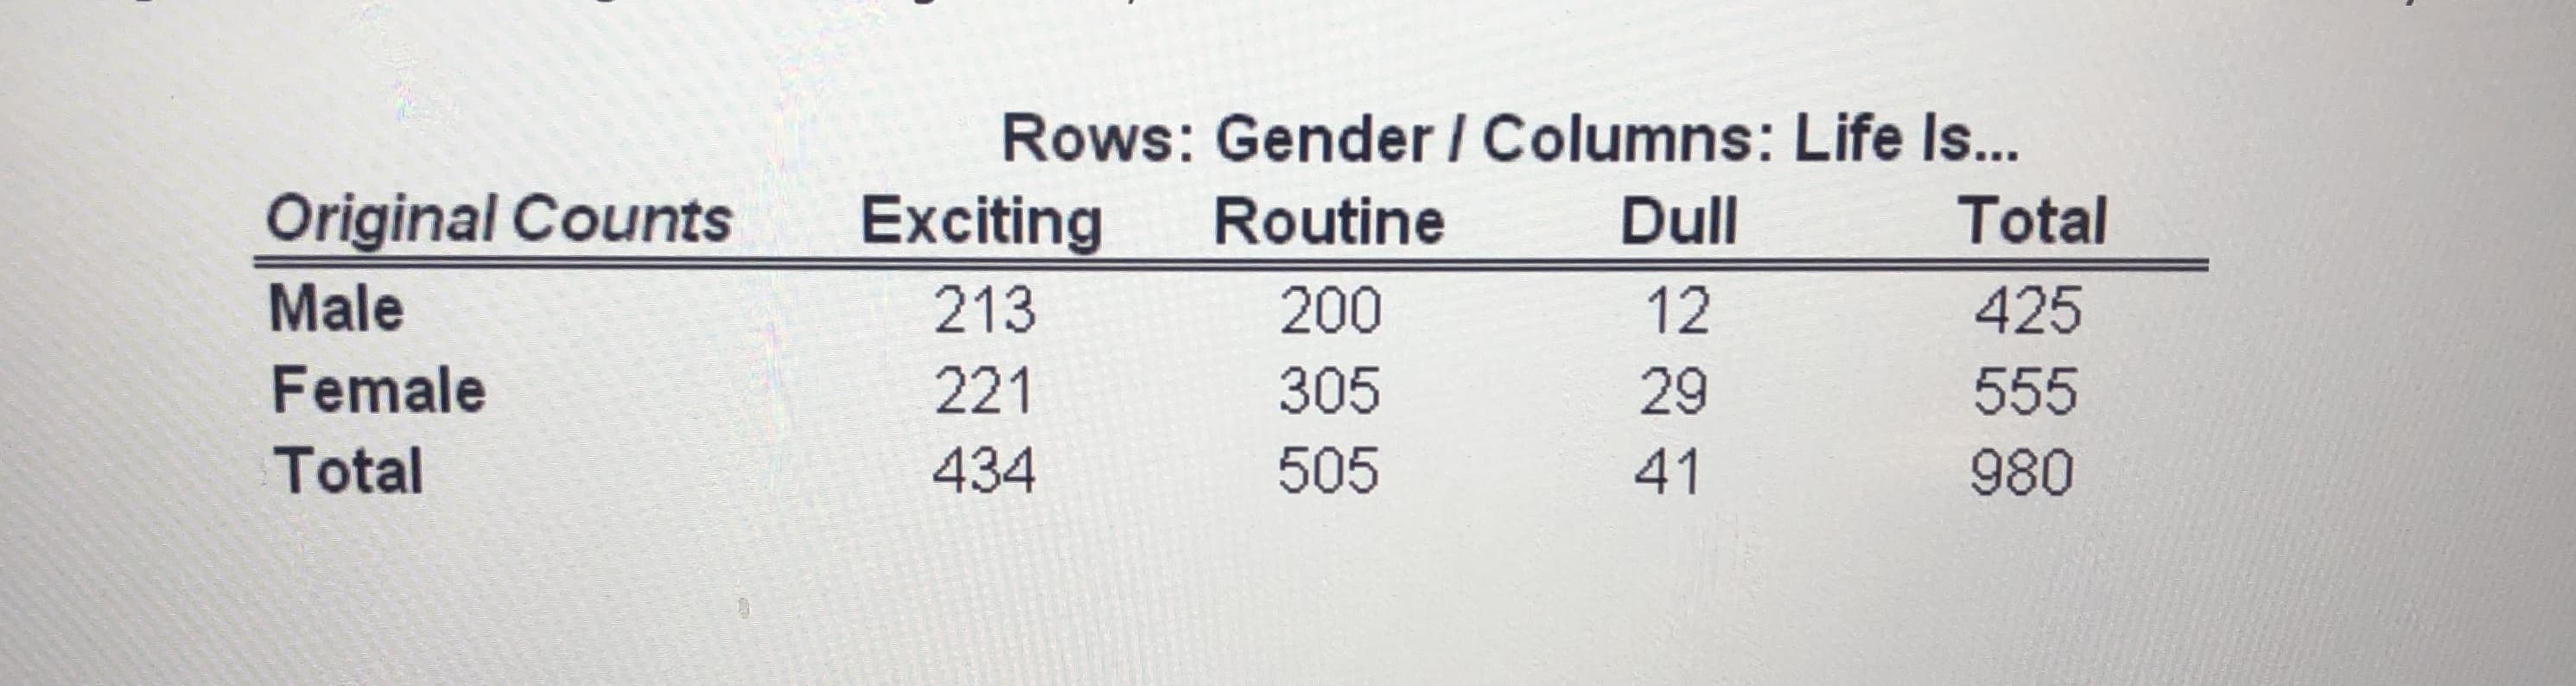 Rows: Gender / Columns: Life Is..
Exciting
Original Counts
Dull
Total
Routine
Male
425
213
200
12
Female
221
305
29
555
Total
434
505
41
980
